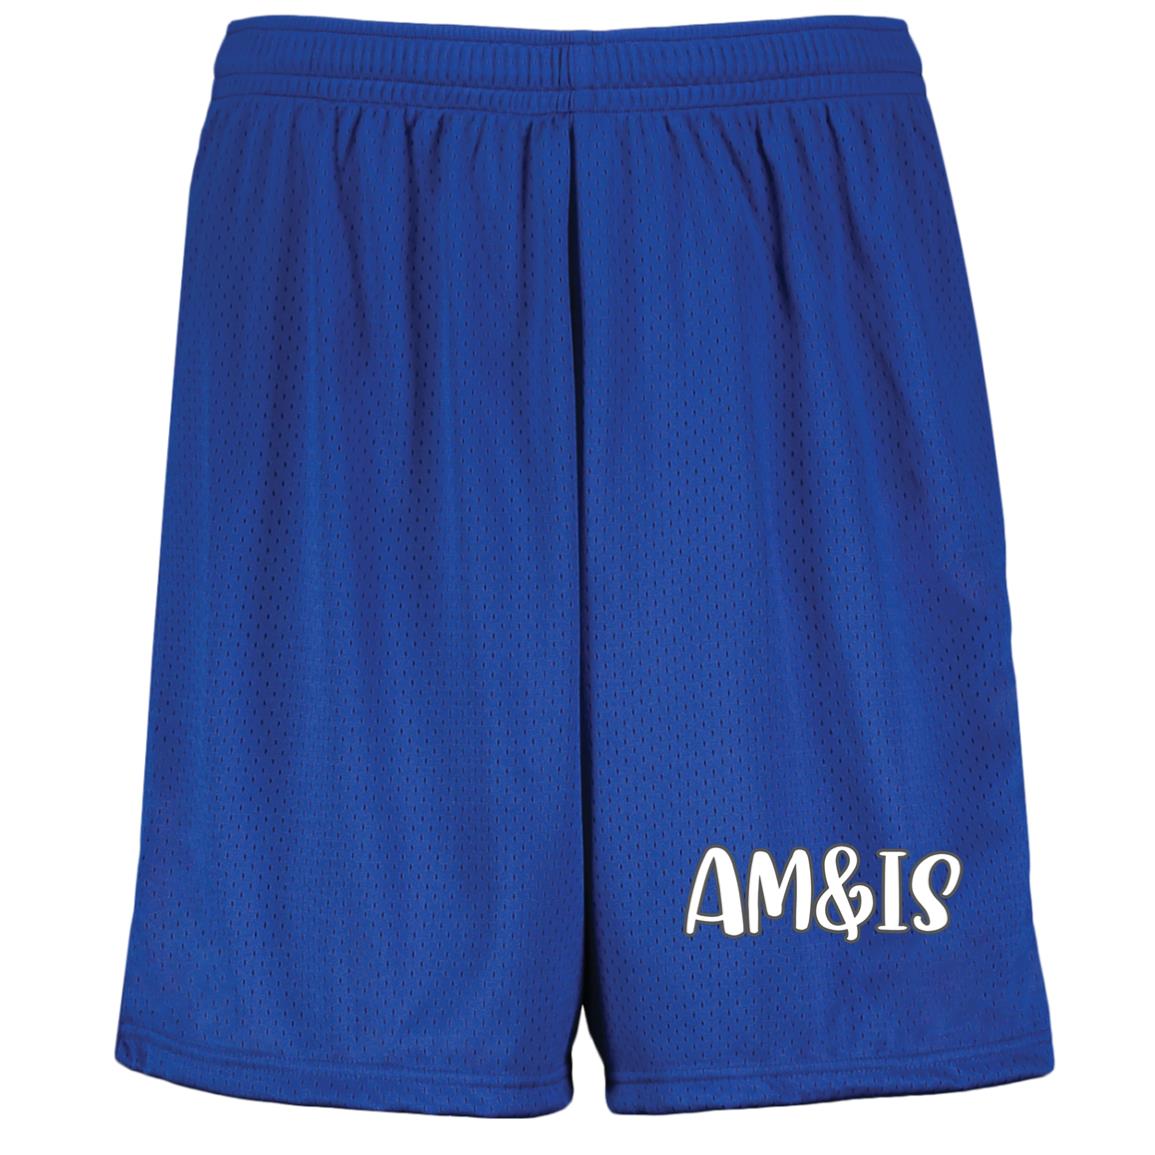 ROYAL - AM&IS Activewear Youth Moisture-Wicking Mesh Shorts - kids shorts at TFC&H Co.